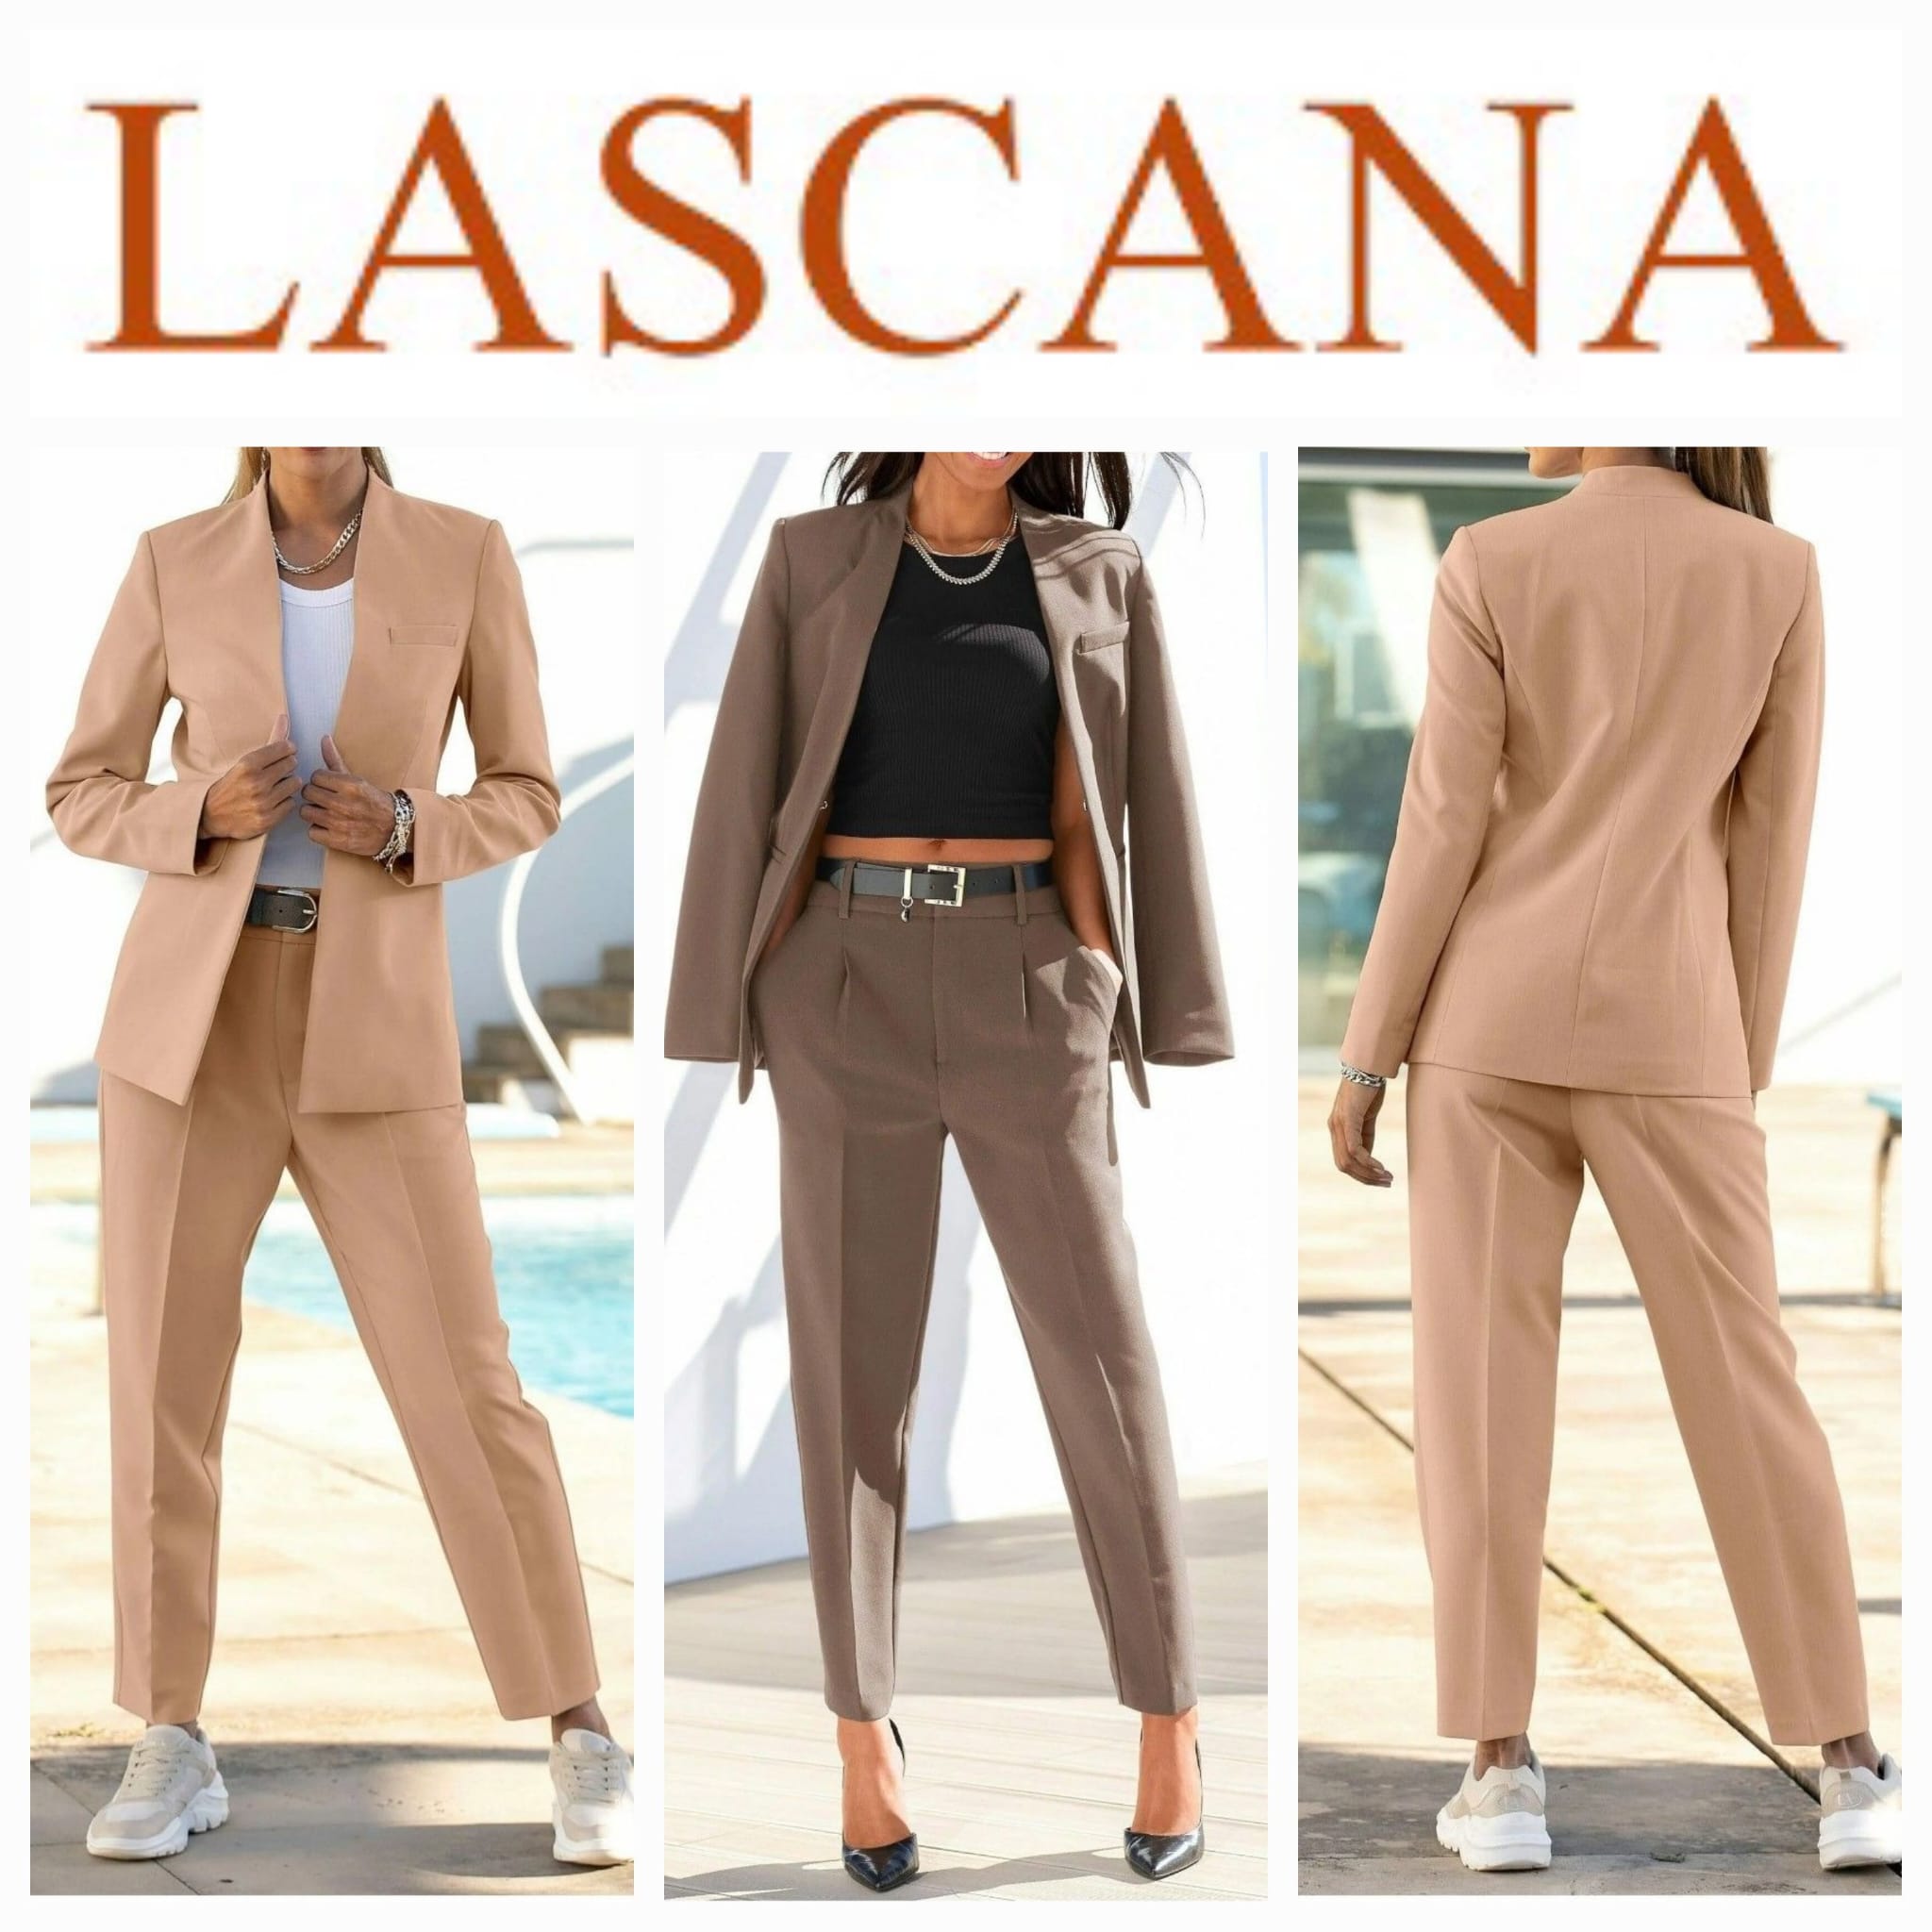 Women's trouser suits from Lascana